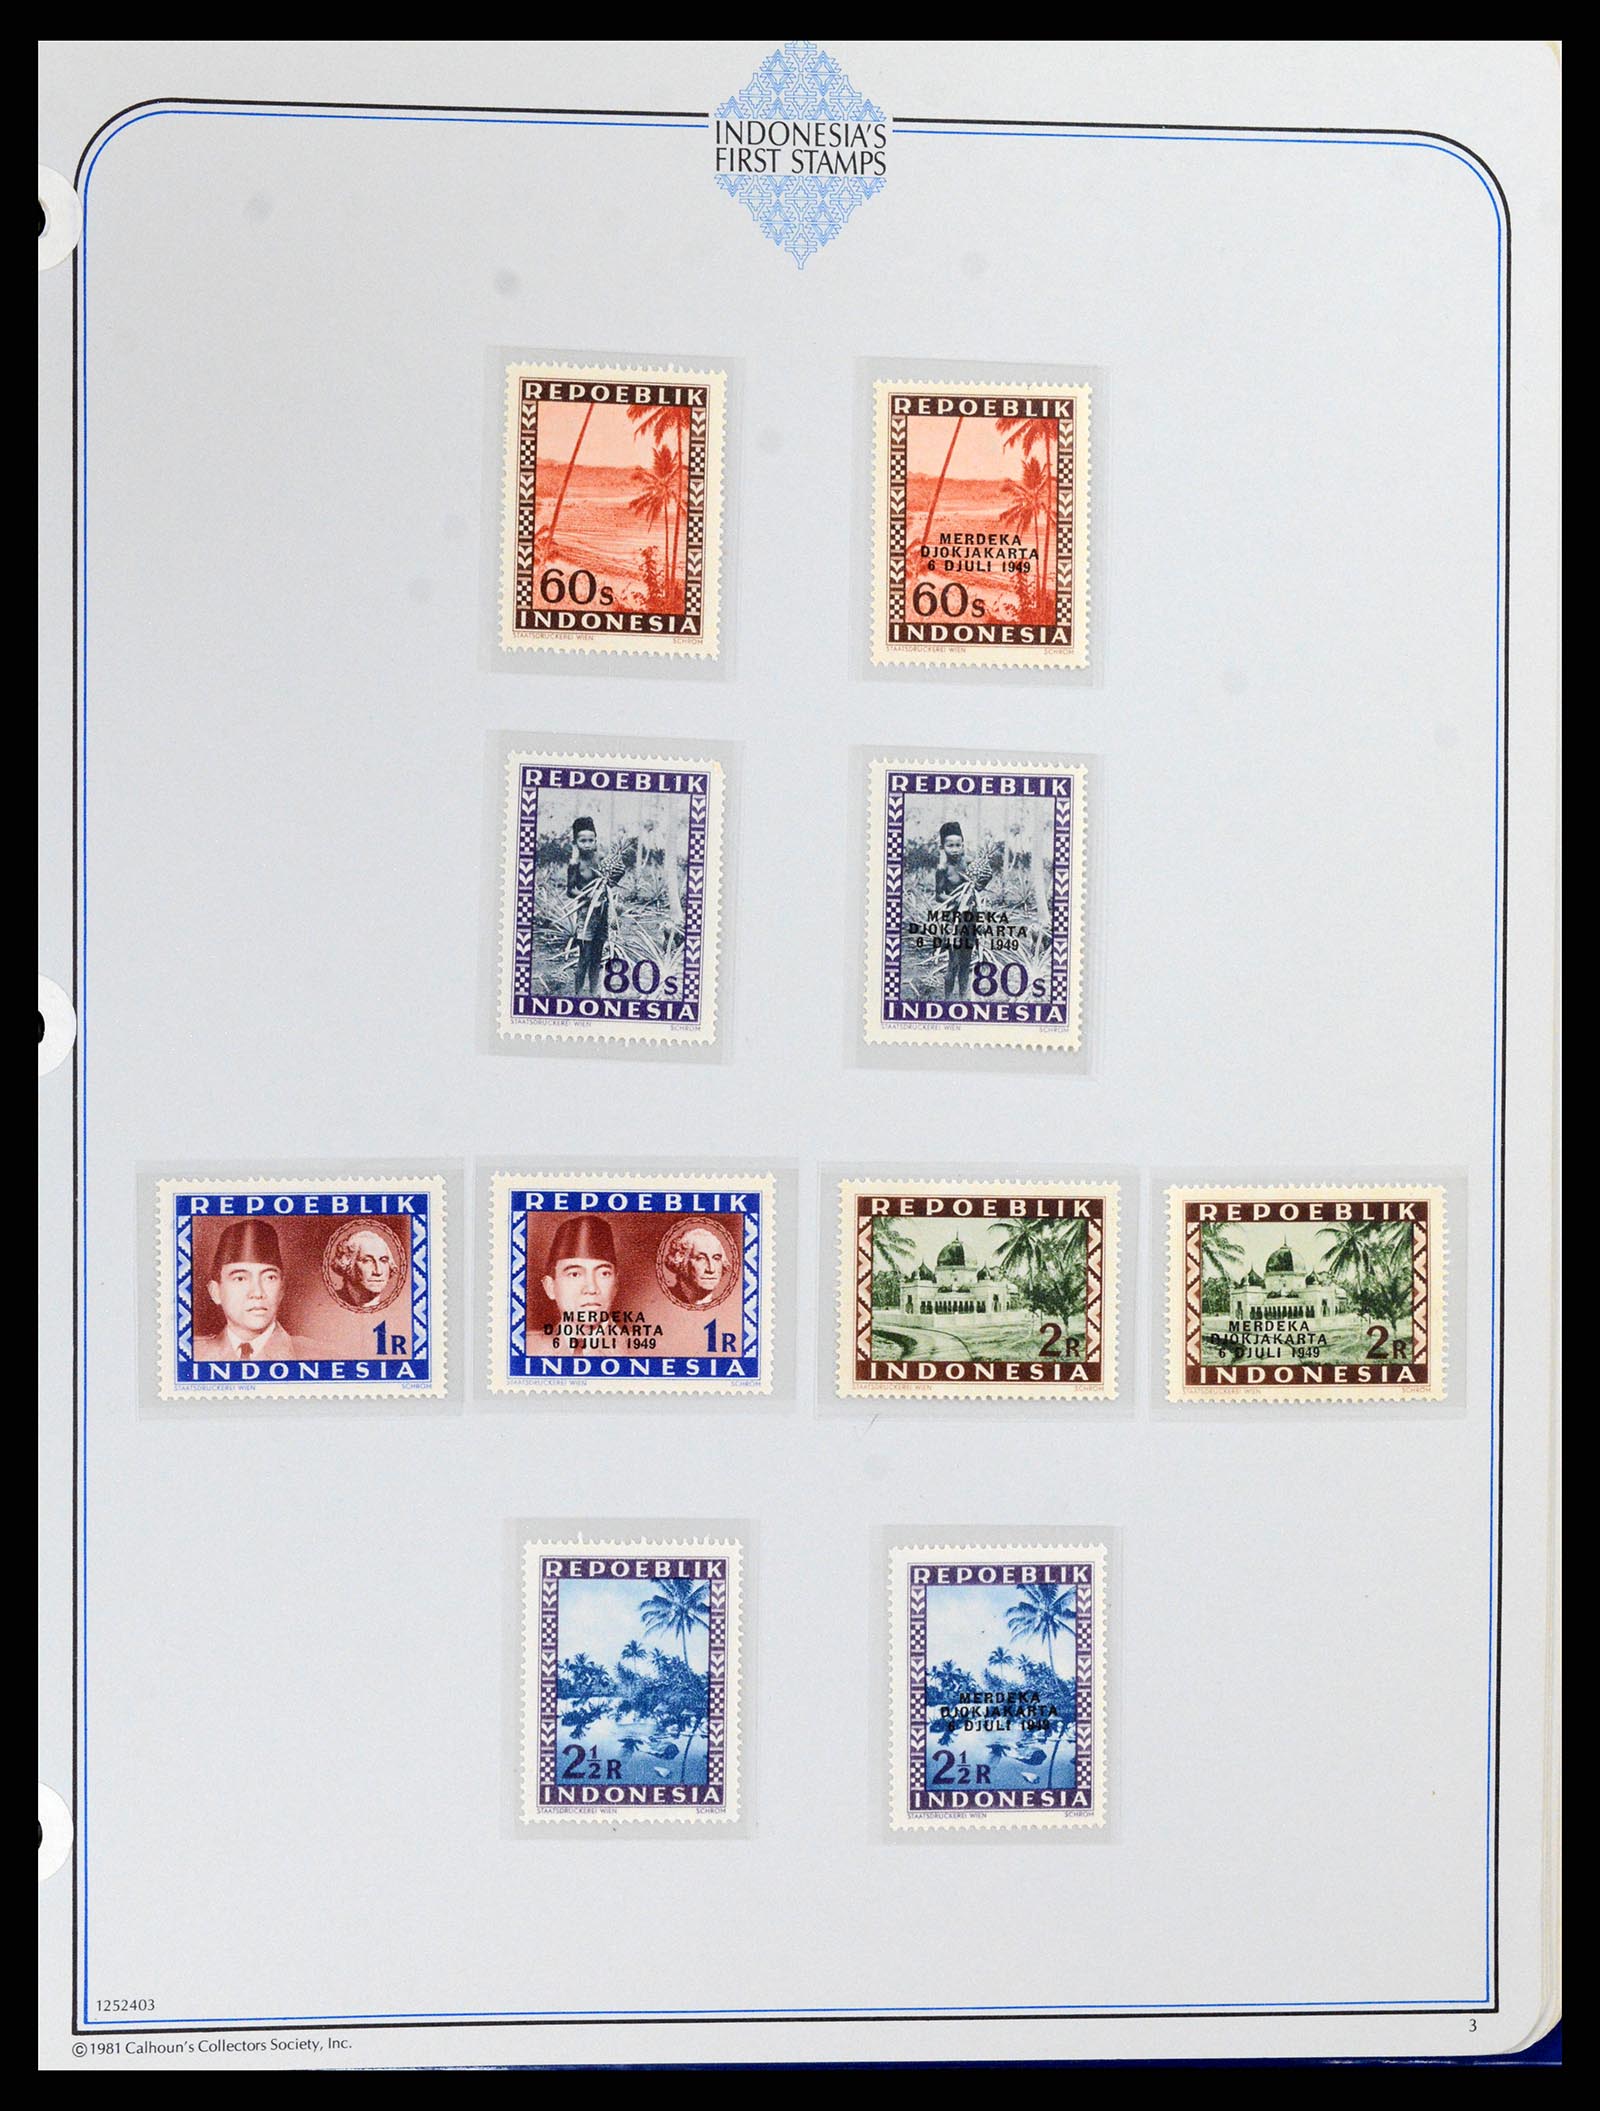 37826 003 - Stamp Collection 37826 Indonesia Vienna printings 1947-1949.